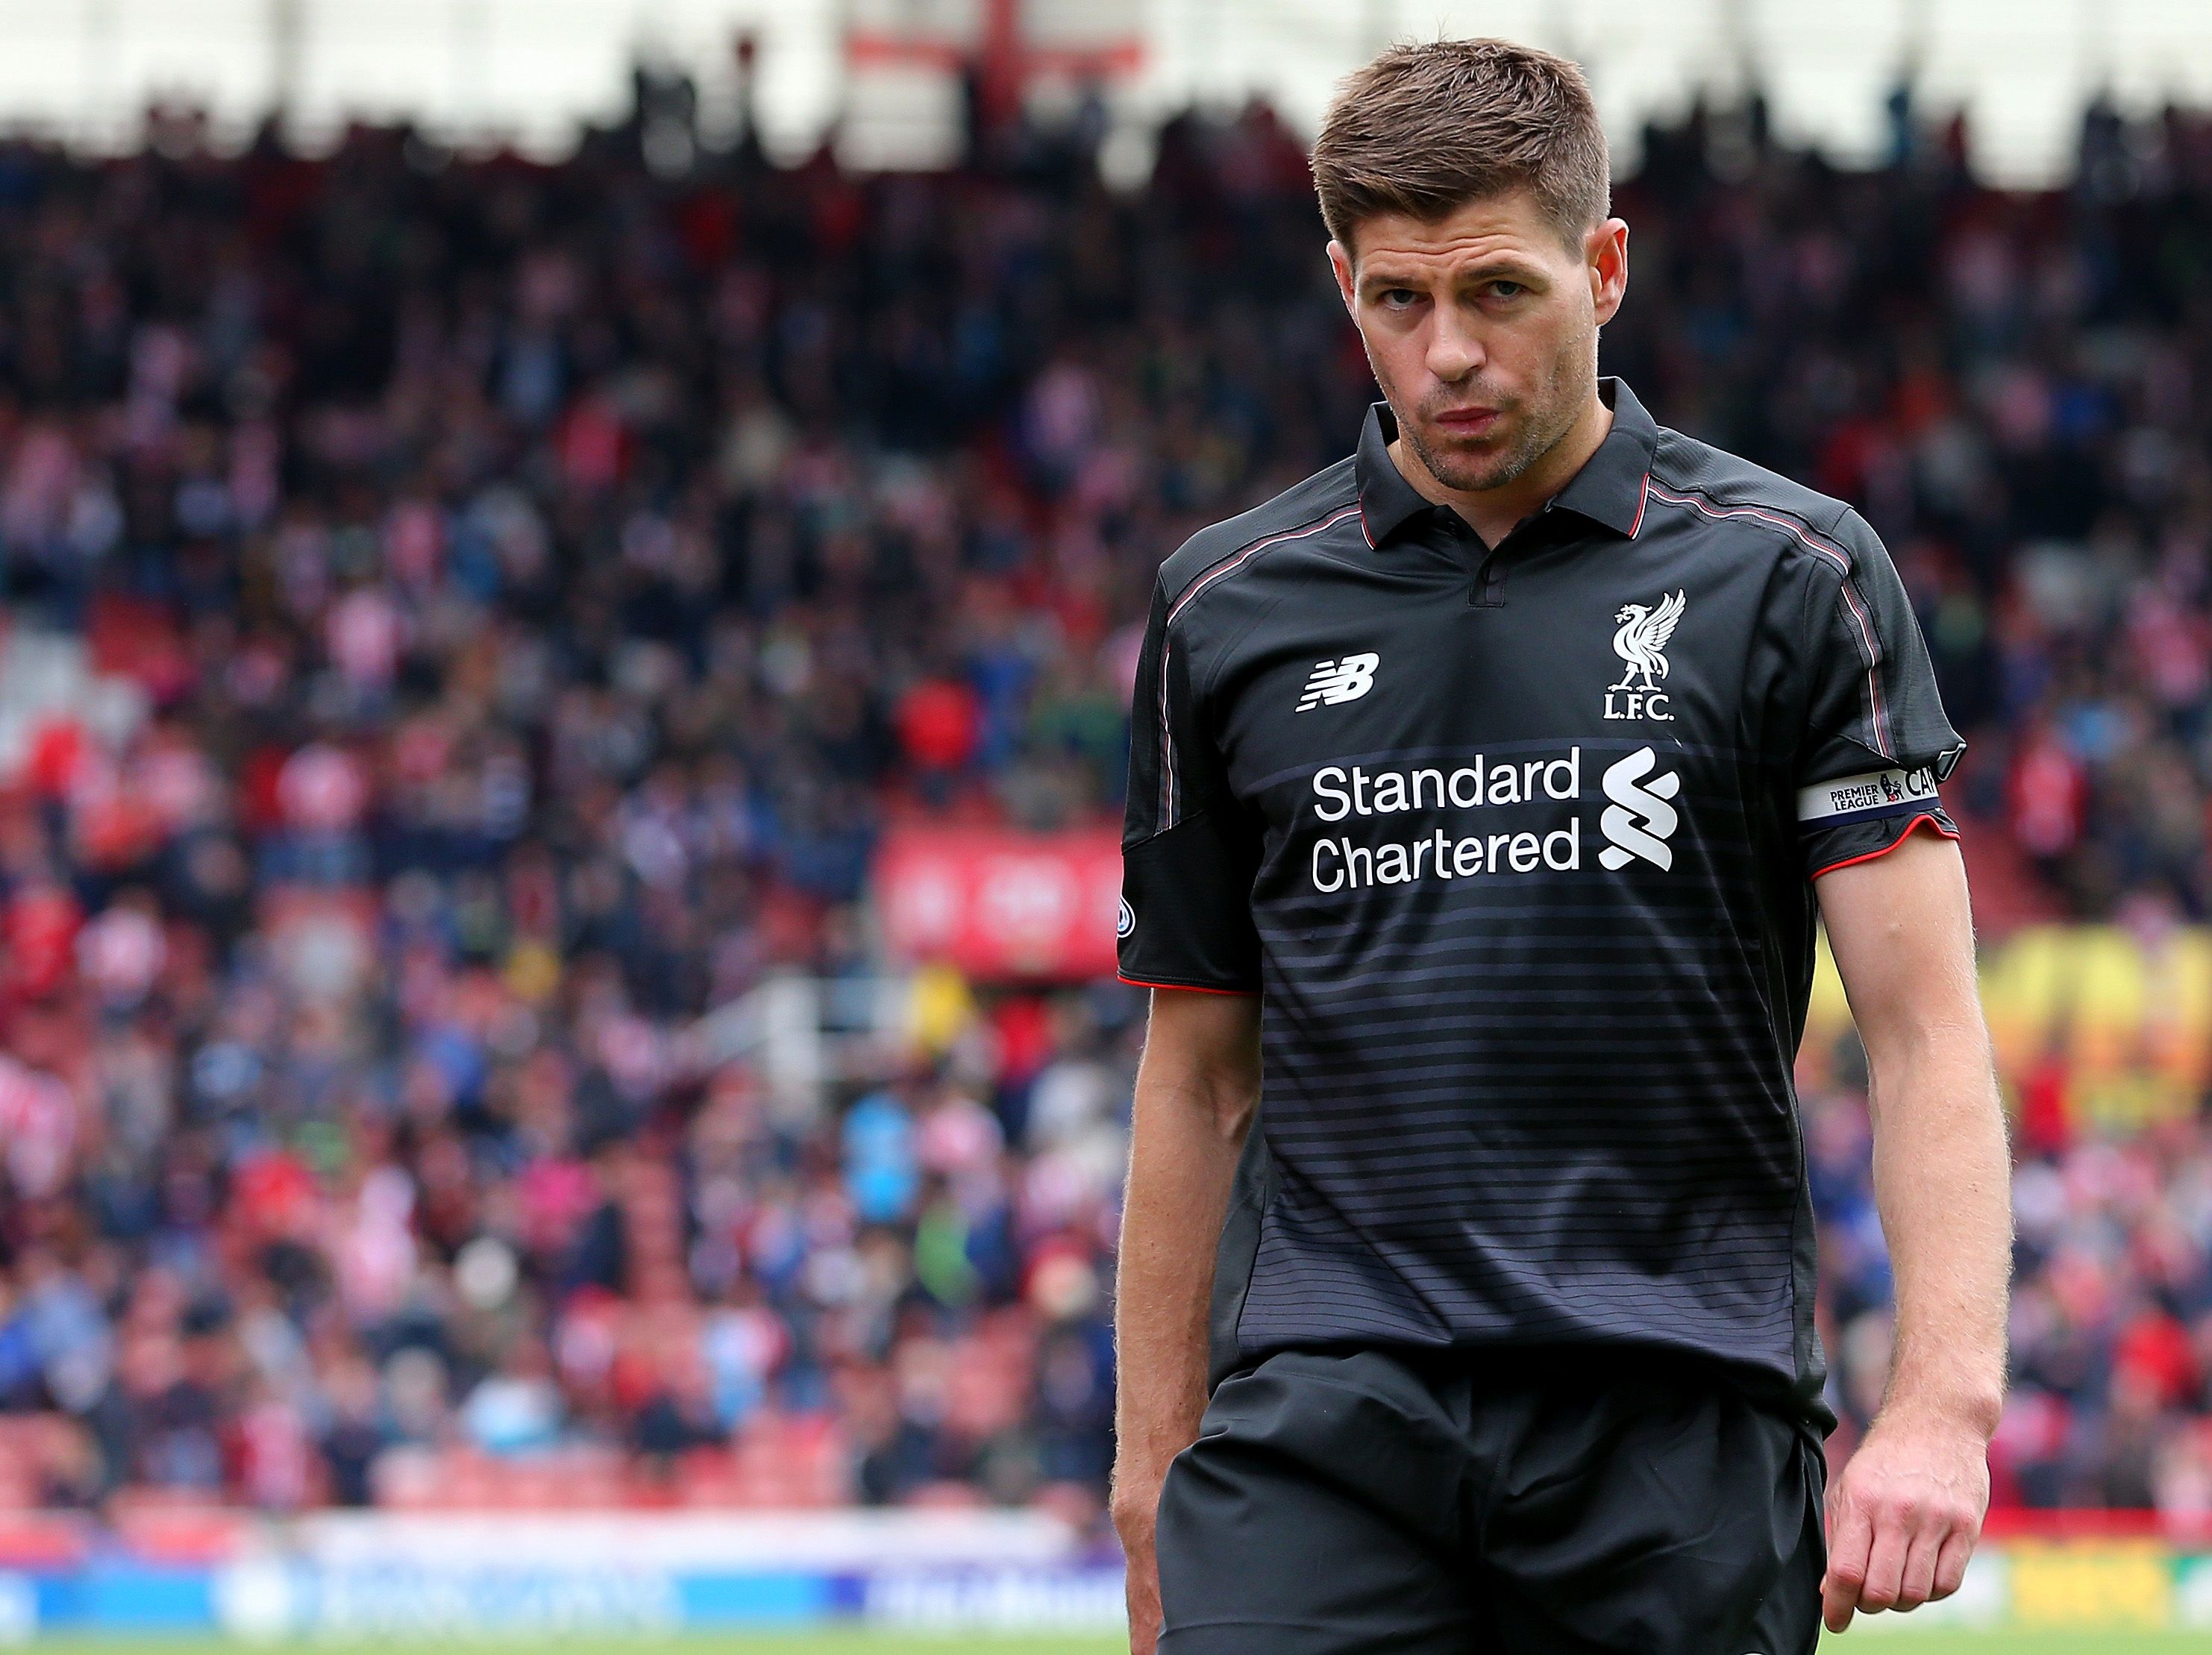 Gerrard was humiliated in his final Premier League game